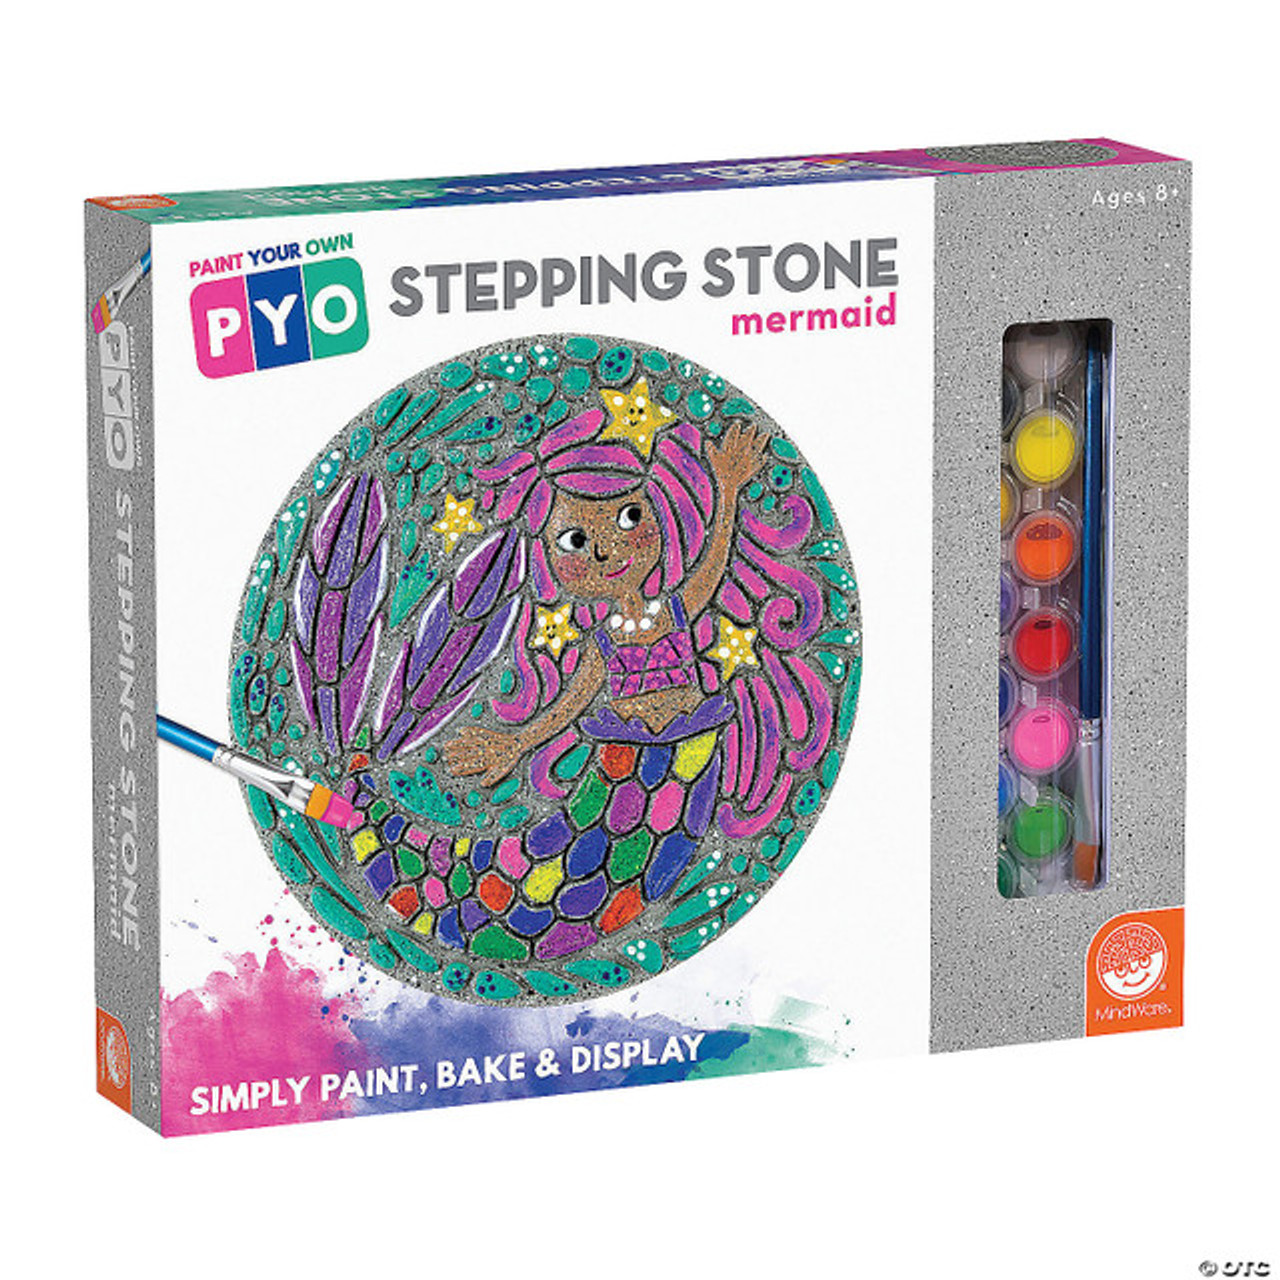 Paint Your Mermaid Stepping Stone